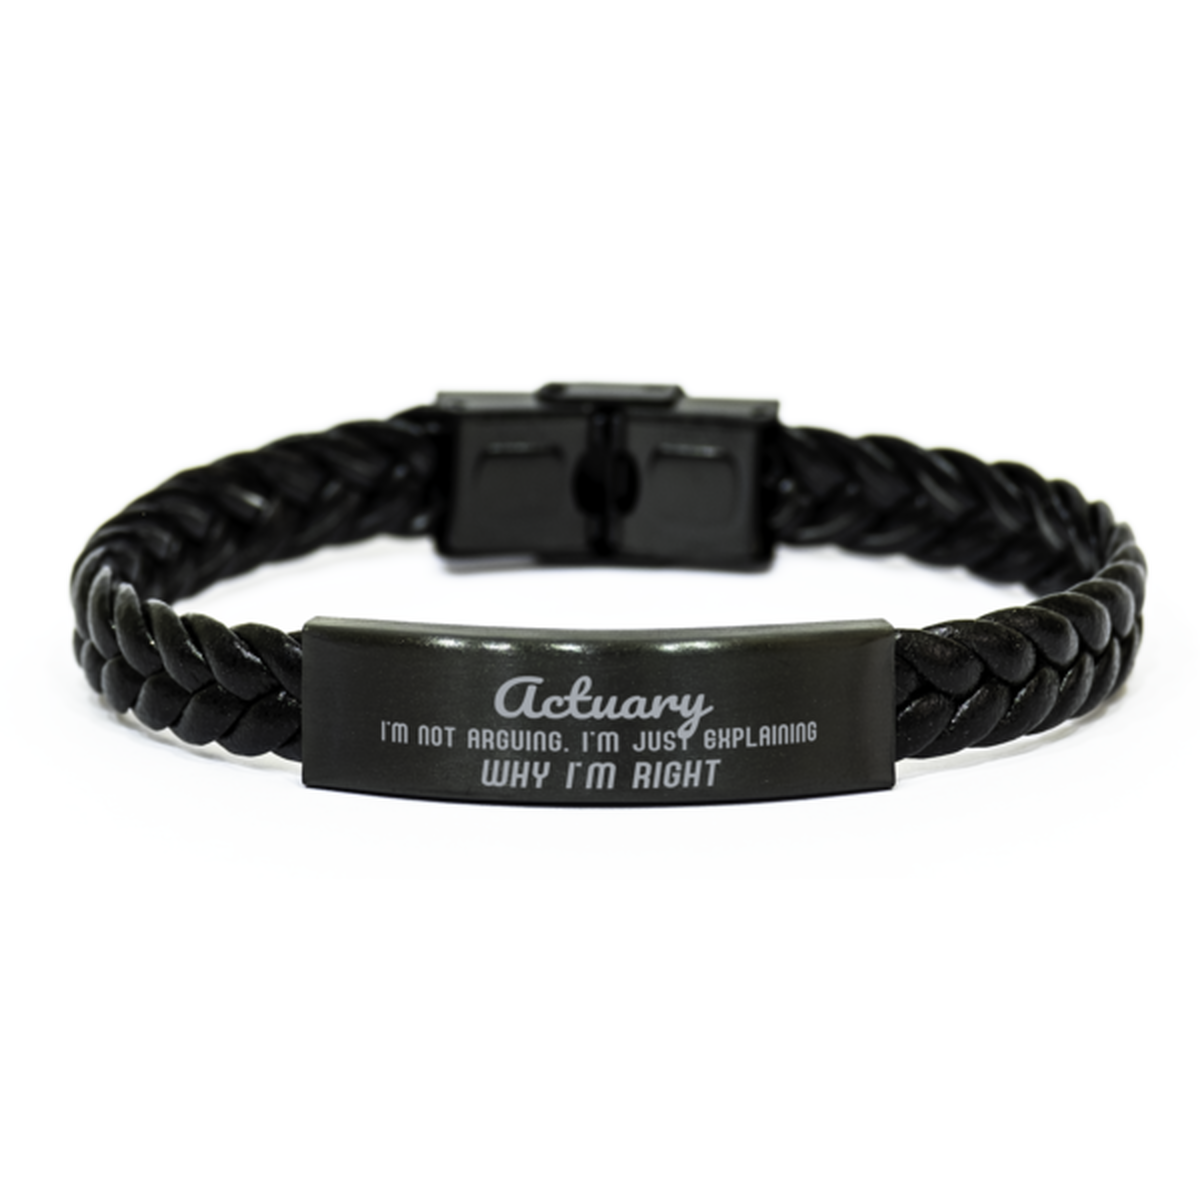 Actuary I'm not Arguing. I'm Just Explaining Why I'm RIGHT Braided Leather Bracelet, Graduation Birthday Christmas Actuary Gifts For Actuary Funny Saying Quote Present for Men Women Coworker